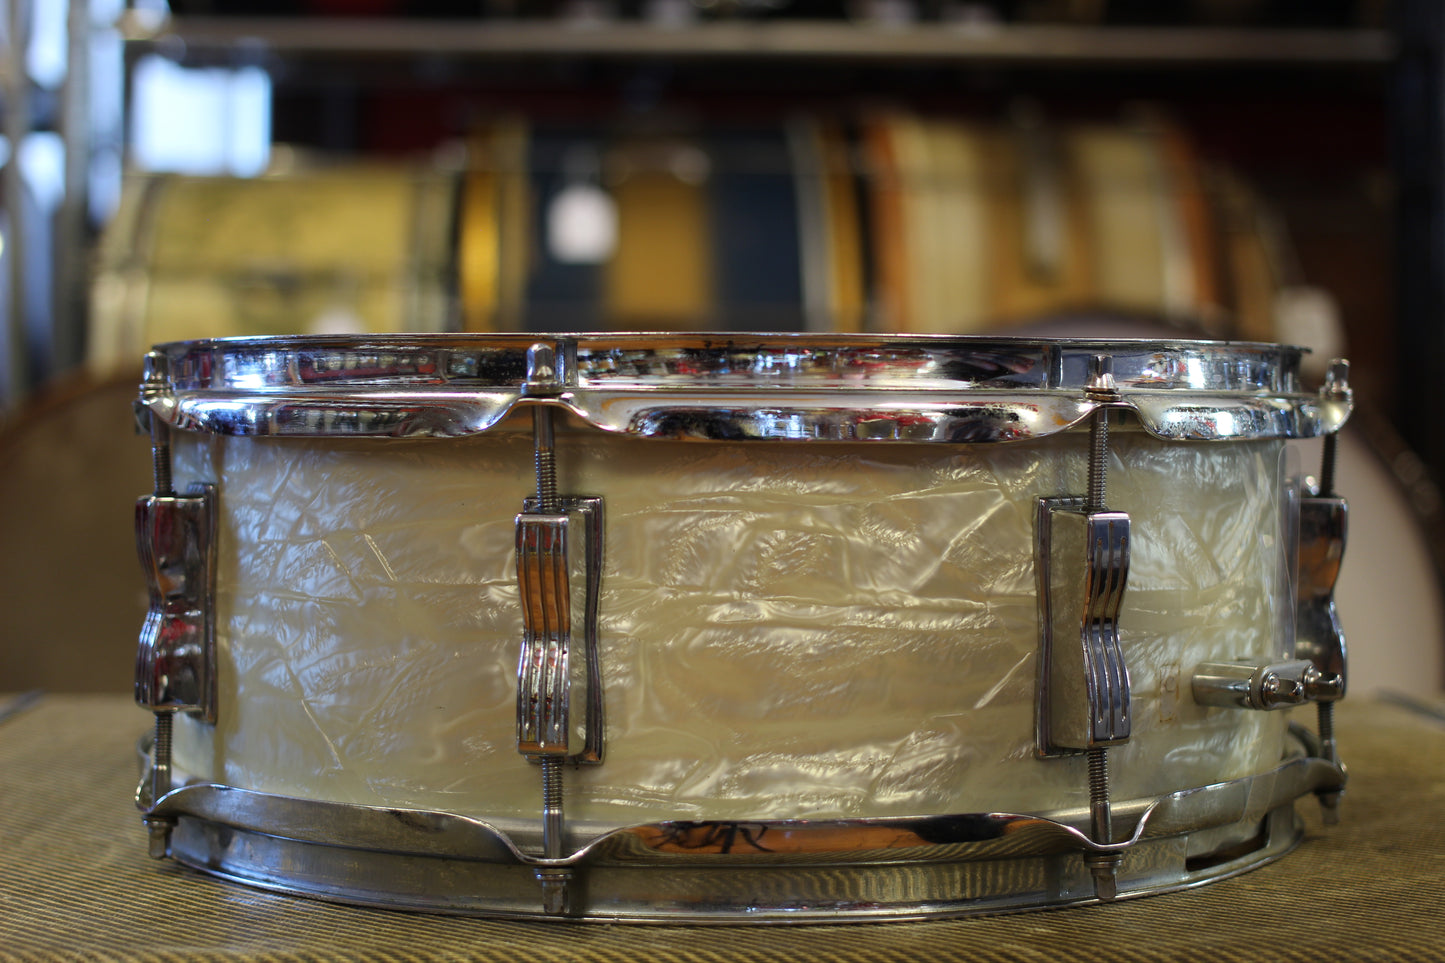 1966 Ludwig "Jazz Festival" Snare Drum 5"x14" in White Marine Pearl